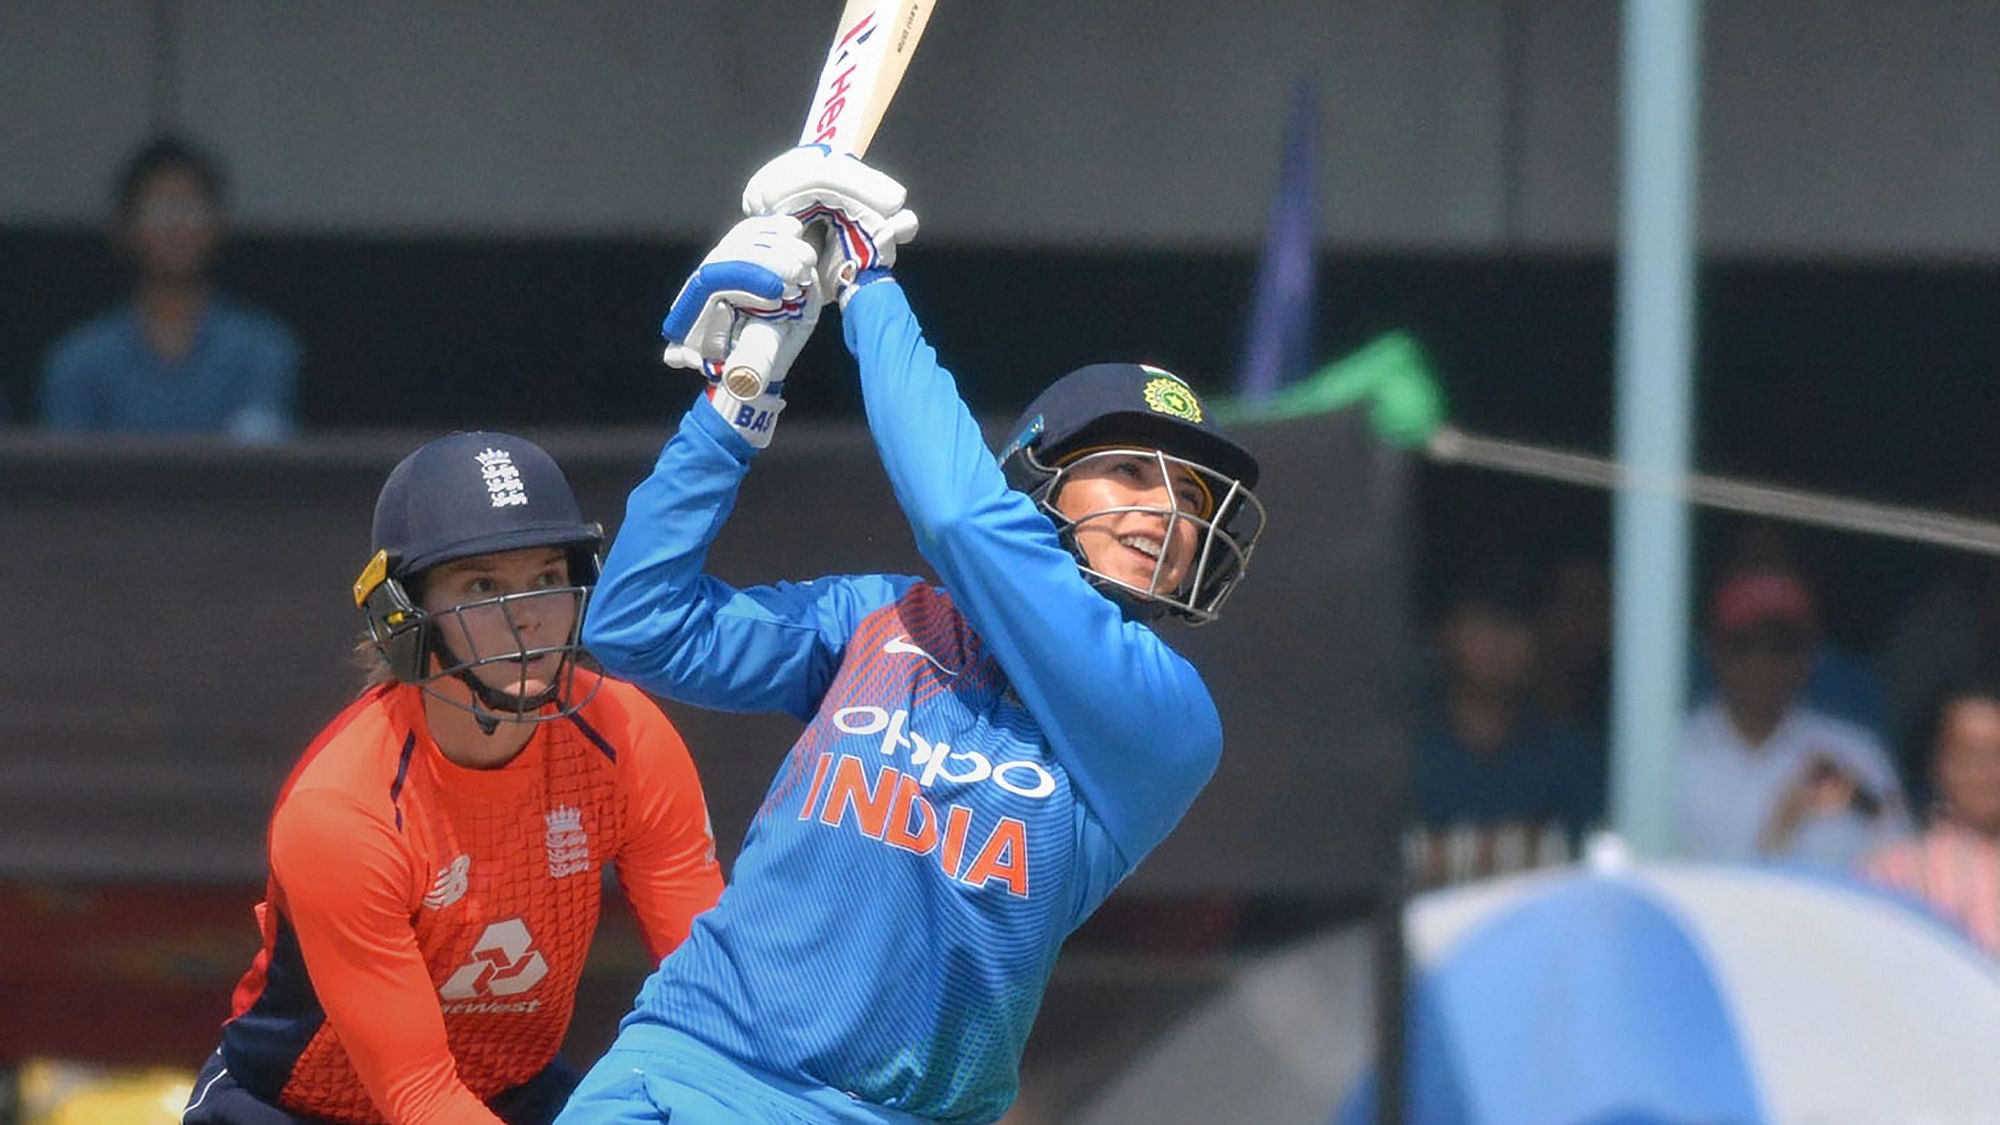 Captain Smriti Mandhana’s 58 went in vain as India went down by one run in their final T20I against England at Guwahati to suffer a 3-0 series whitewash.